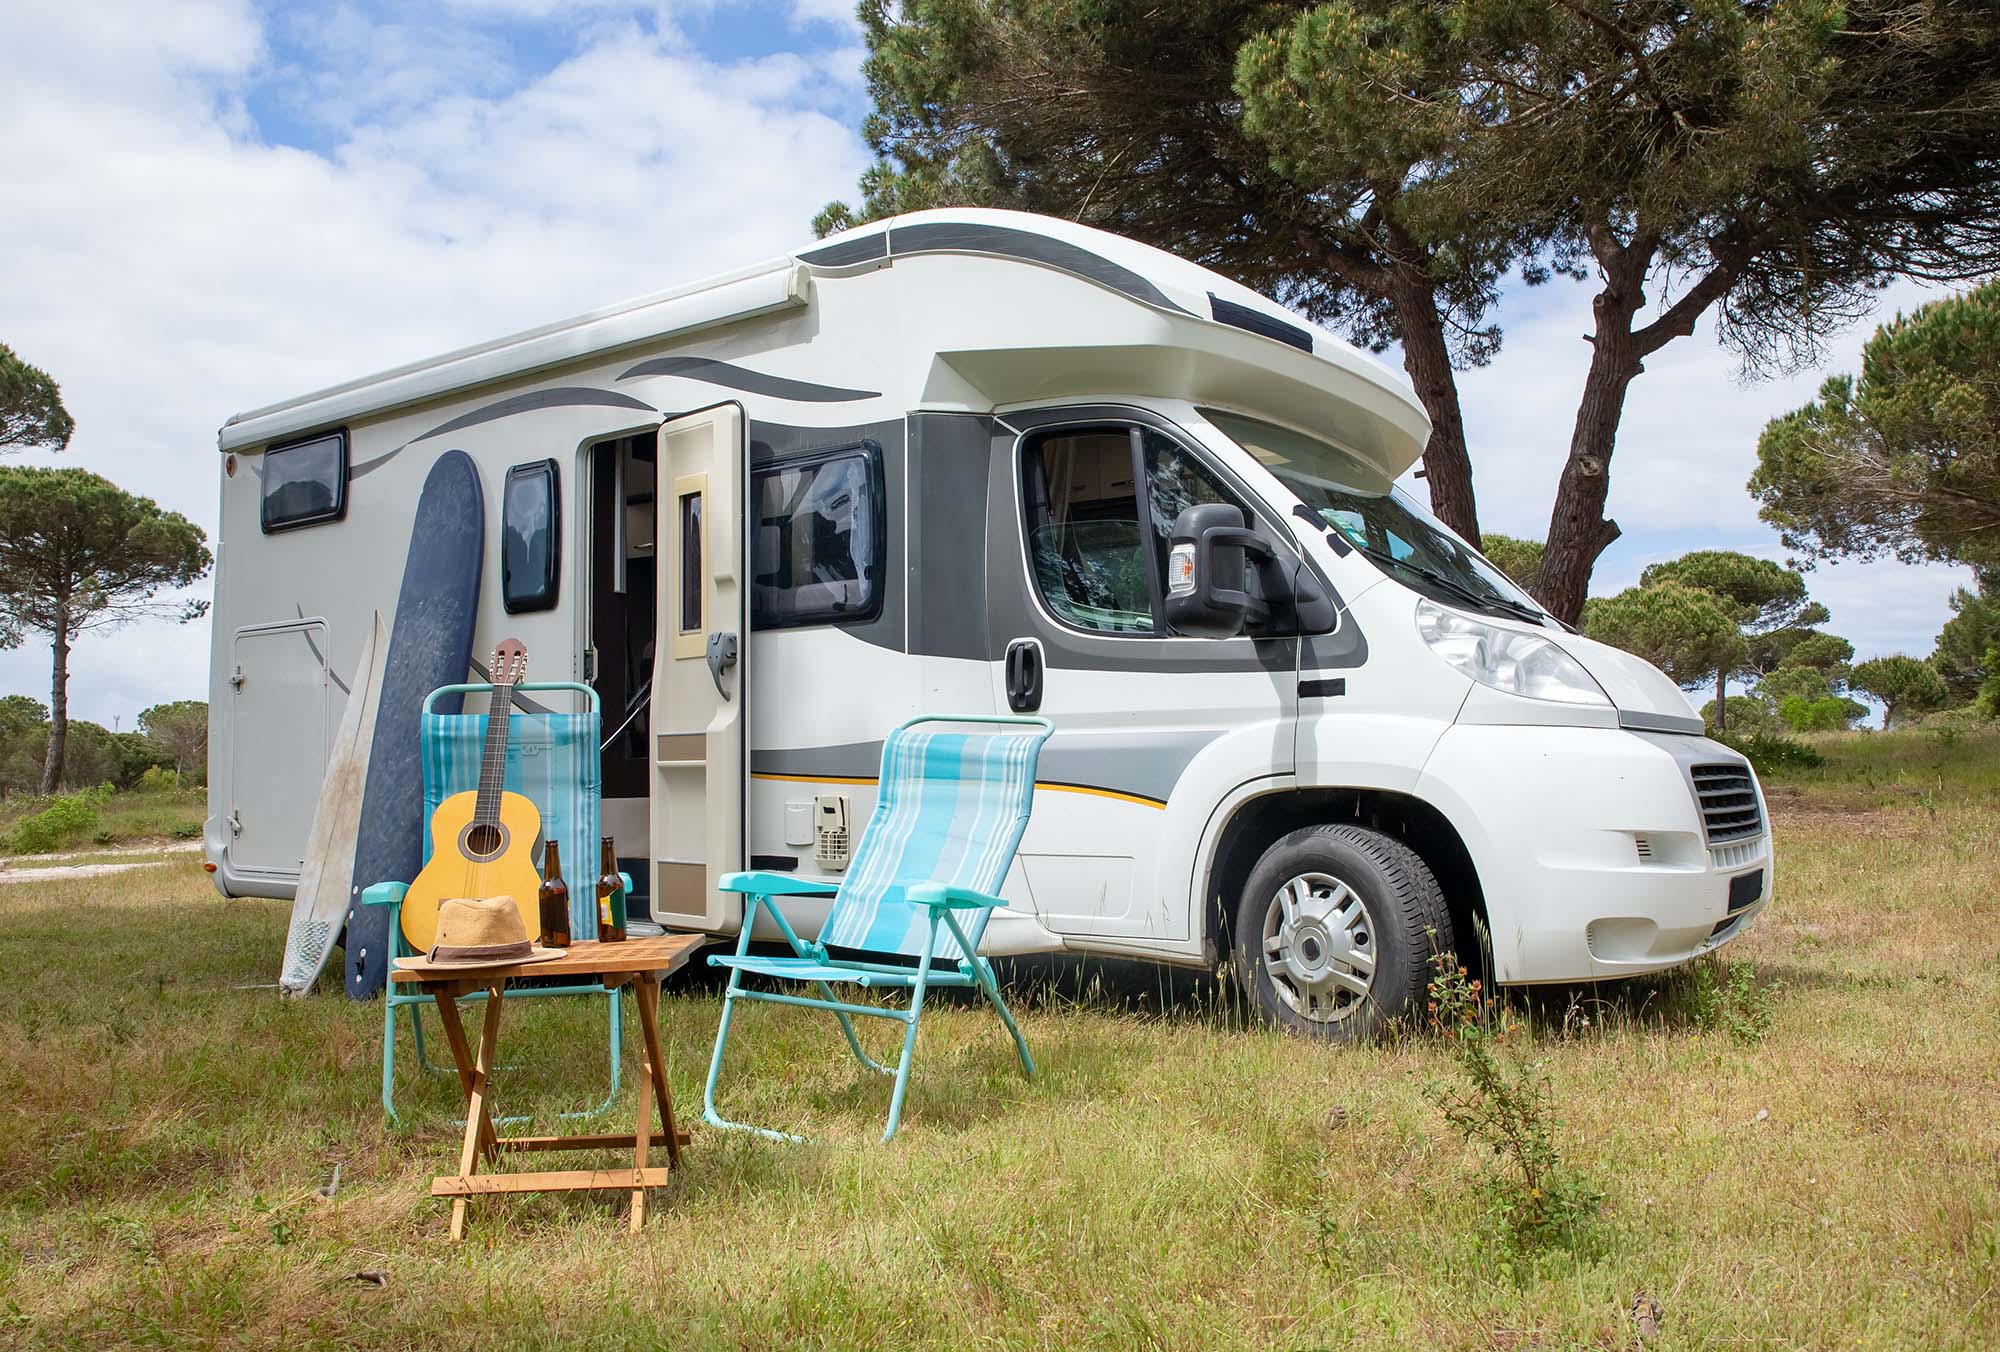 Outdoorsy travelers know <a href="https://www.campingworld.com/" rel="noopener">Camping World</a>. The site's detailed search engine lets RV owners find products for their specific RV make and model. Before your trip, get parts for repairs, upgrades, or maintenance at Camping World.